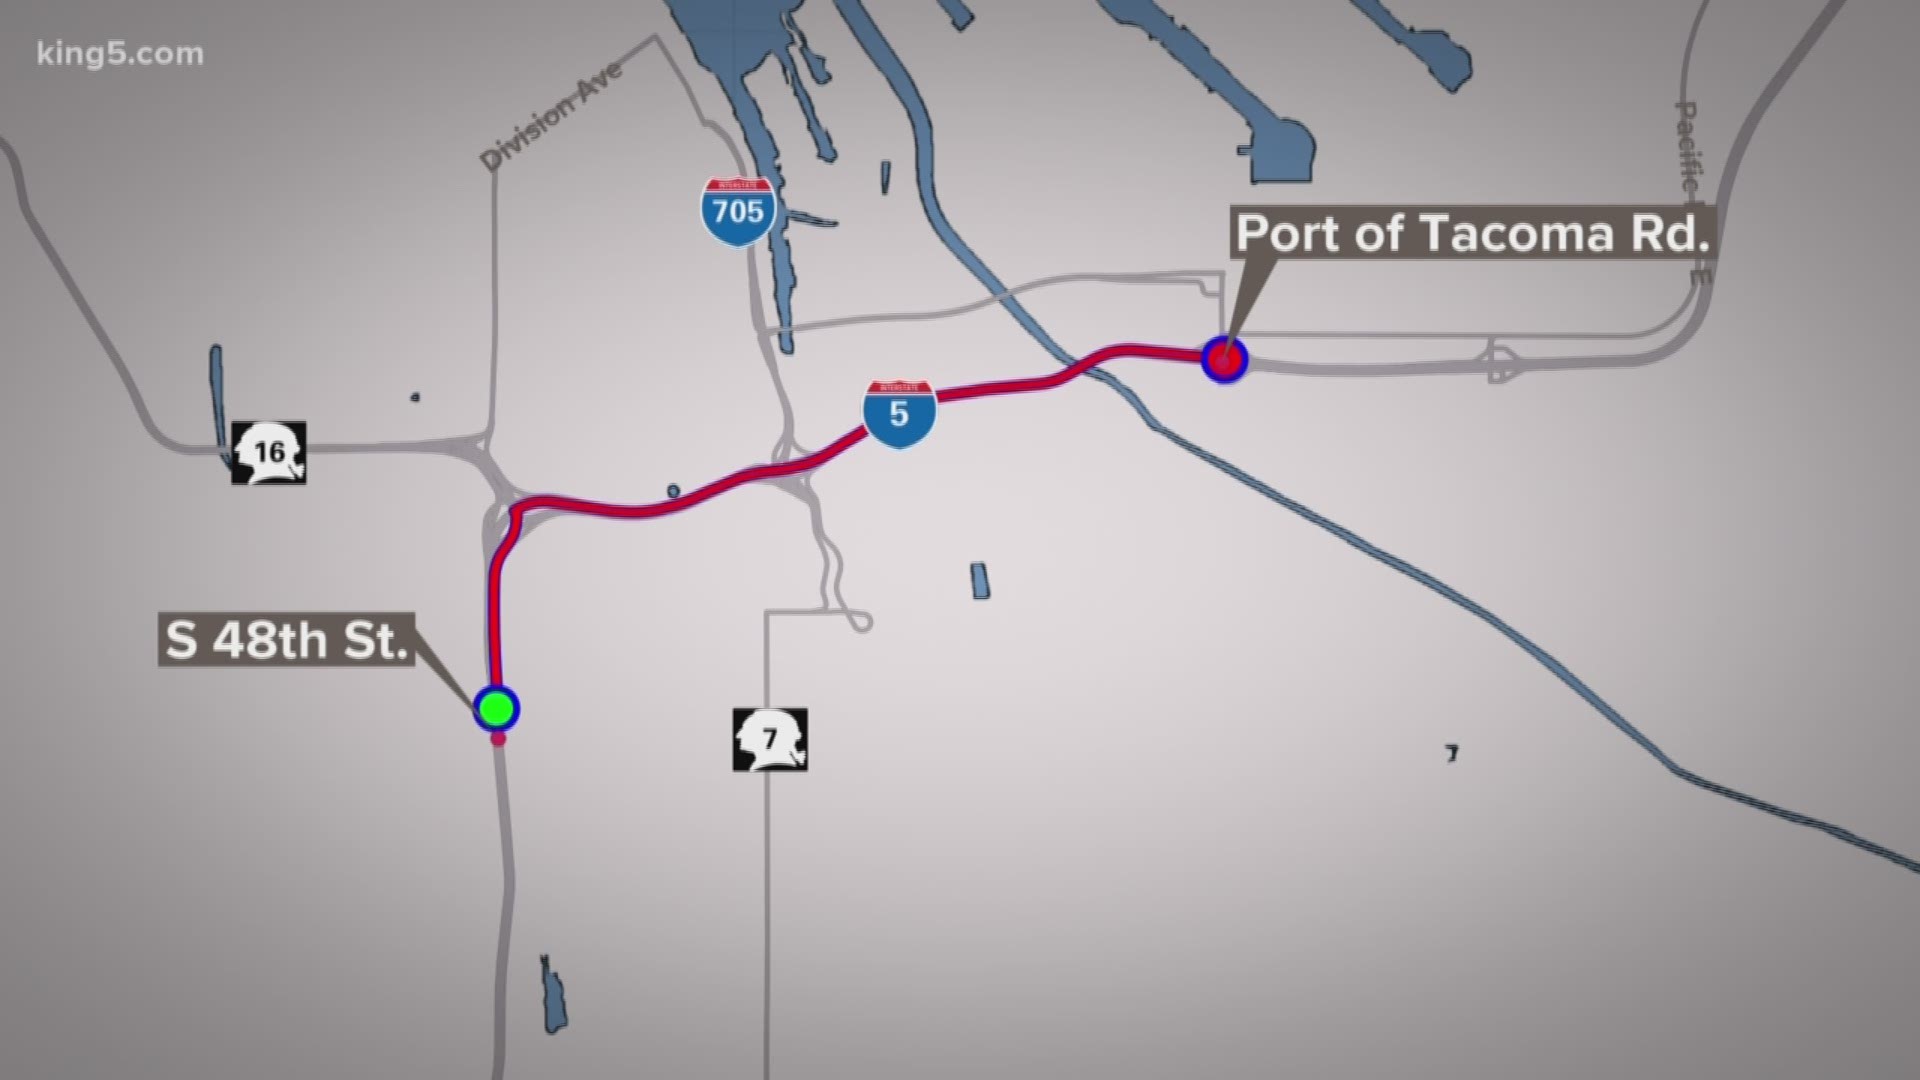 New speed limits are in effect along an eight-mile stretch of Interstate 5 from South 48th Street to Port of Tacoma Road. The new limit is 50 mph.